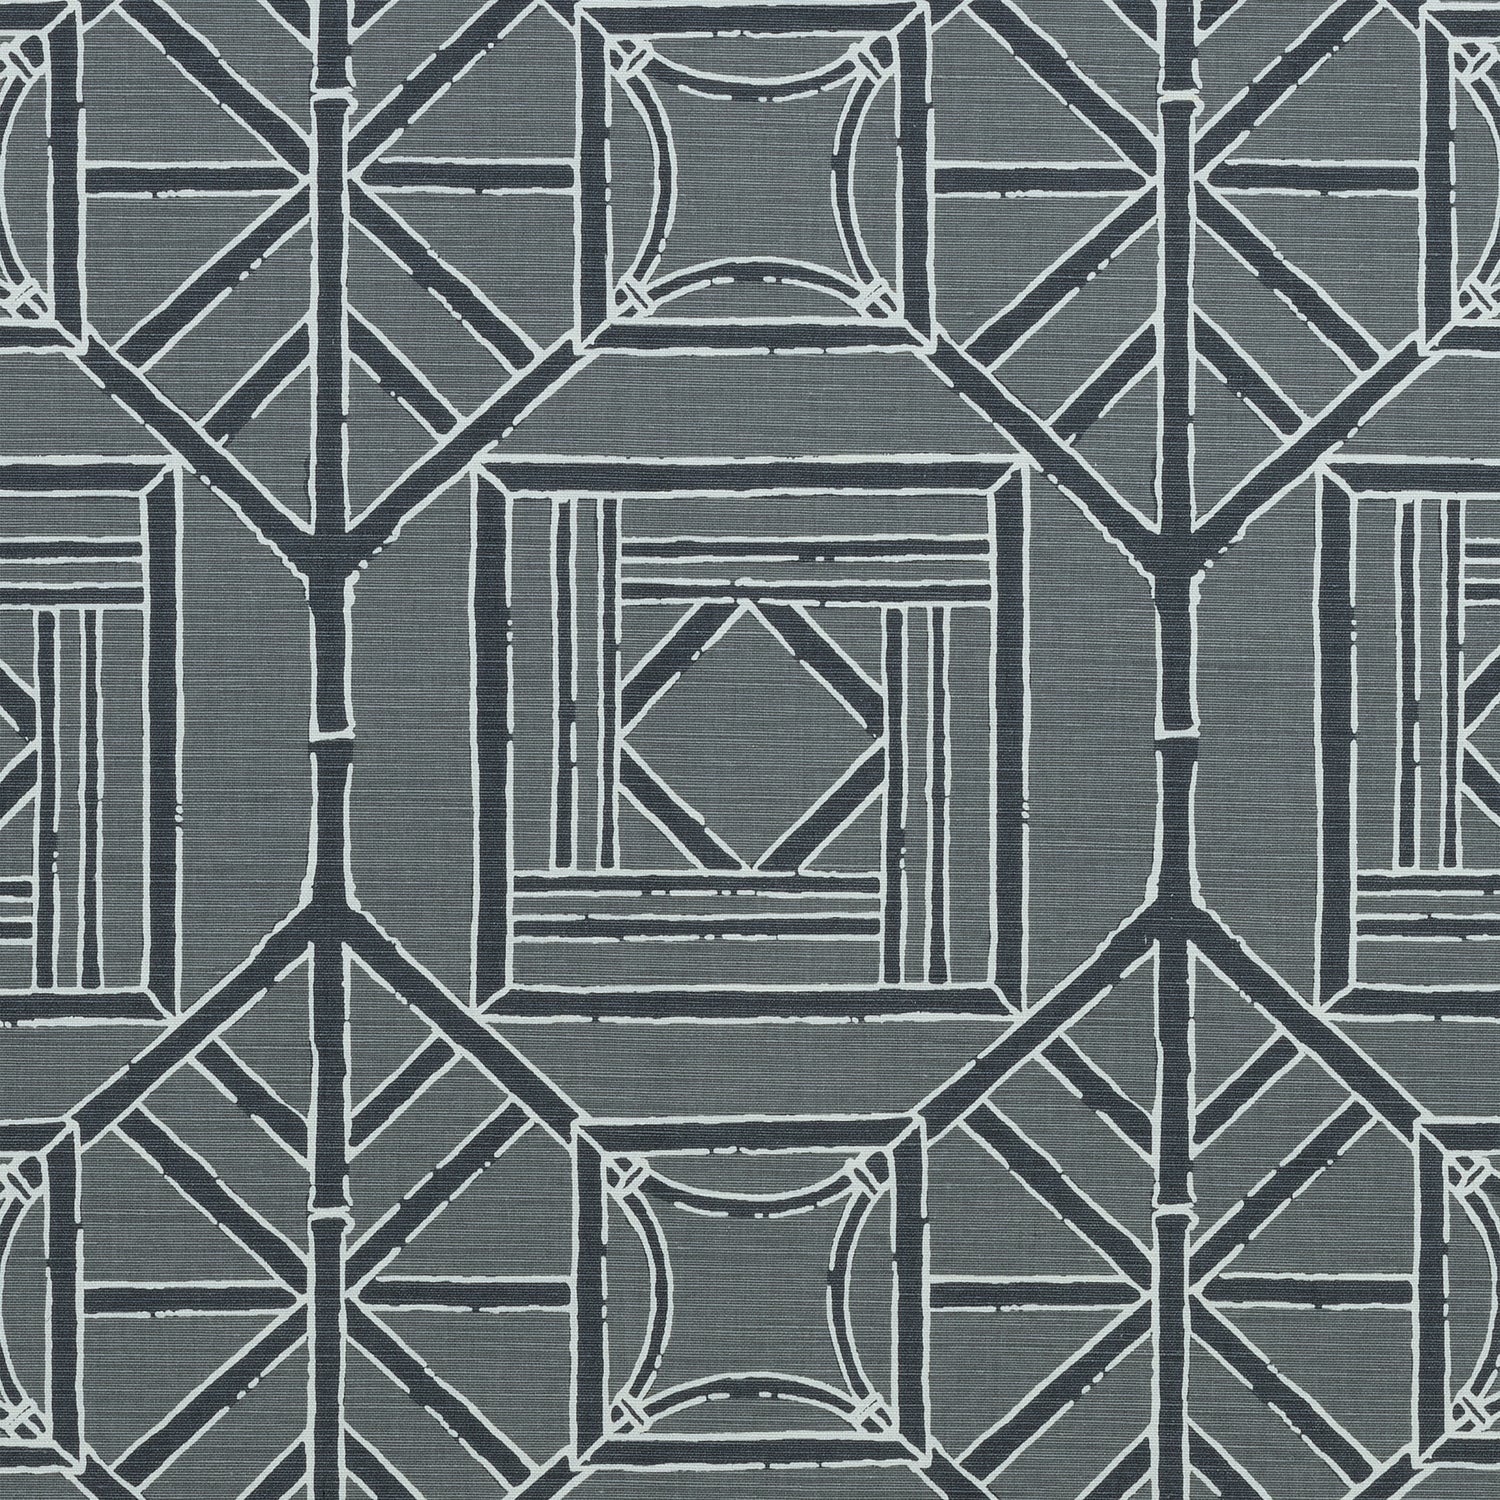 Shoji Panel fabric in grey color - pattern number F975520 - by Thibaut in the Dynasty collection